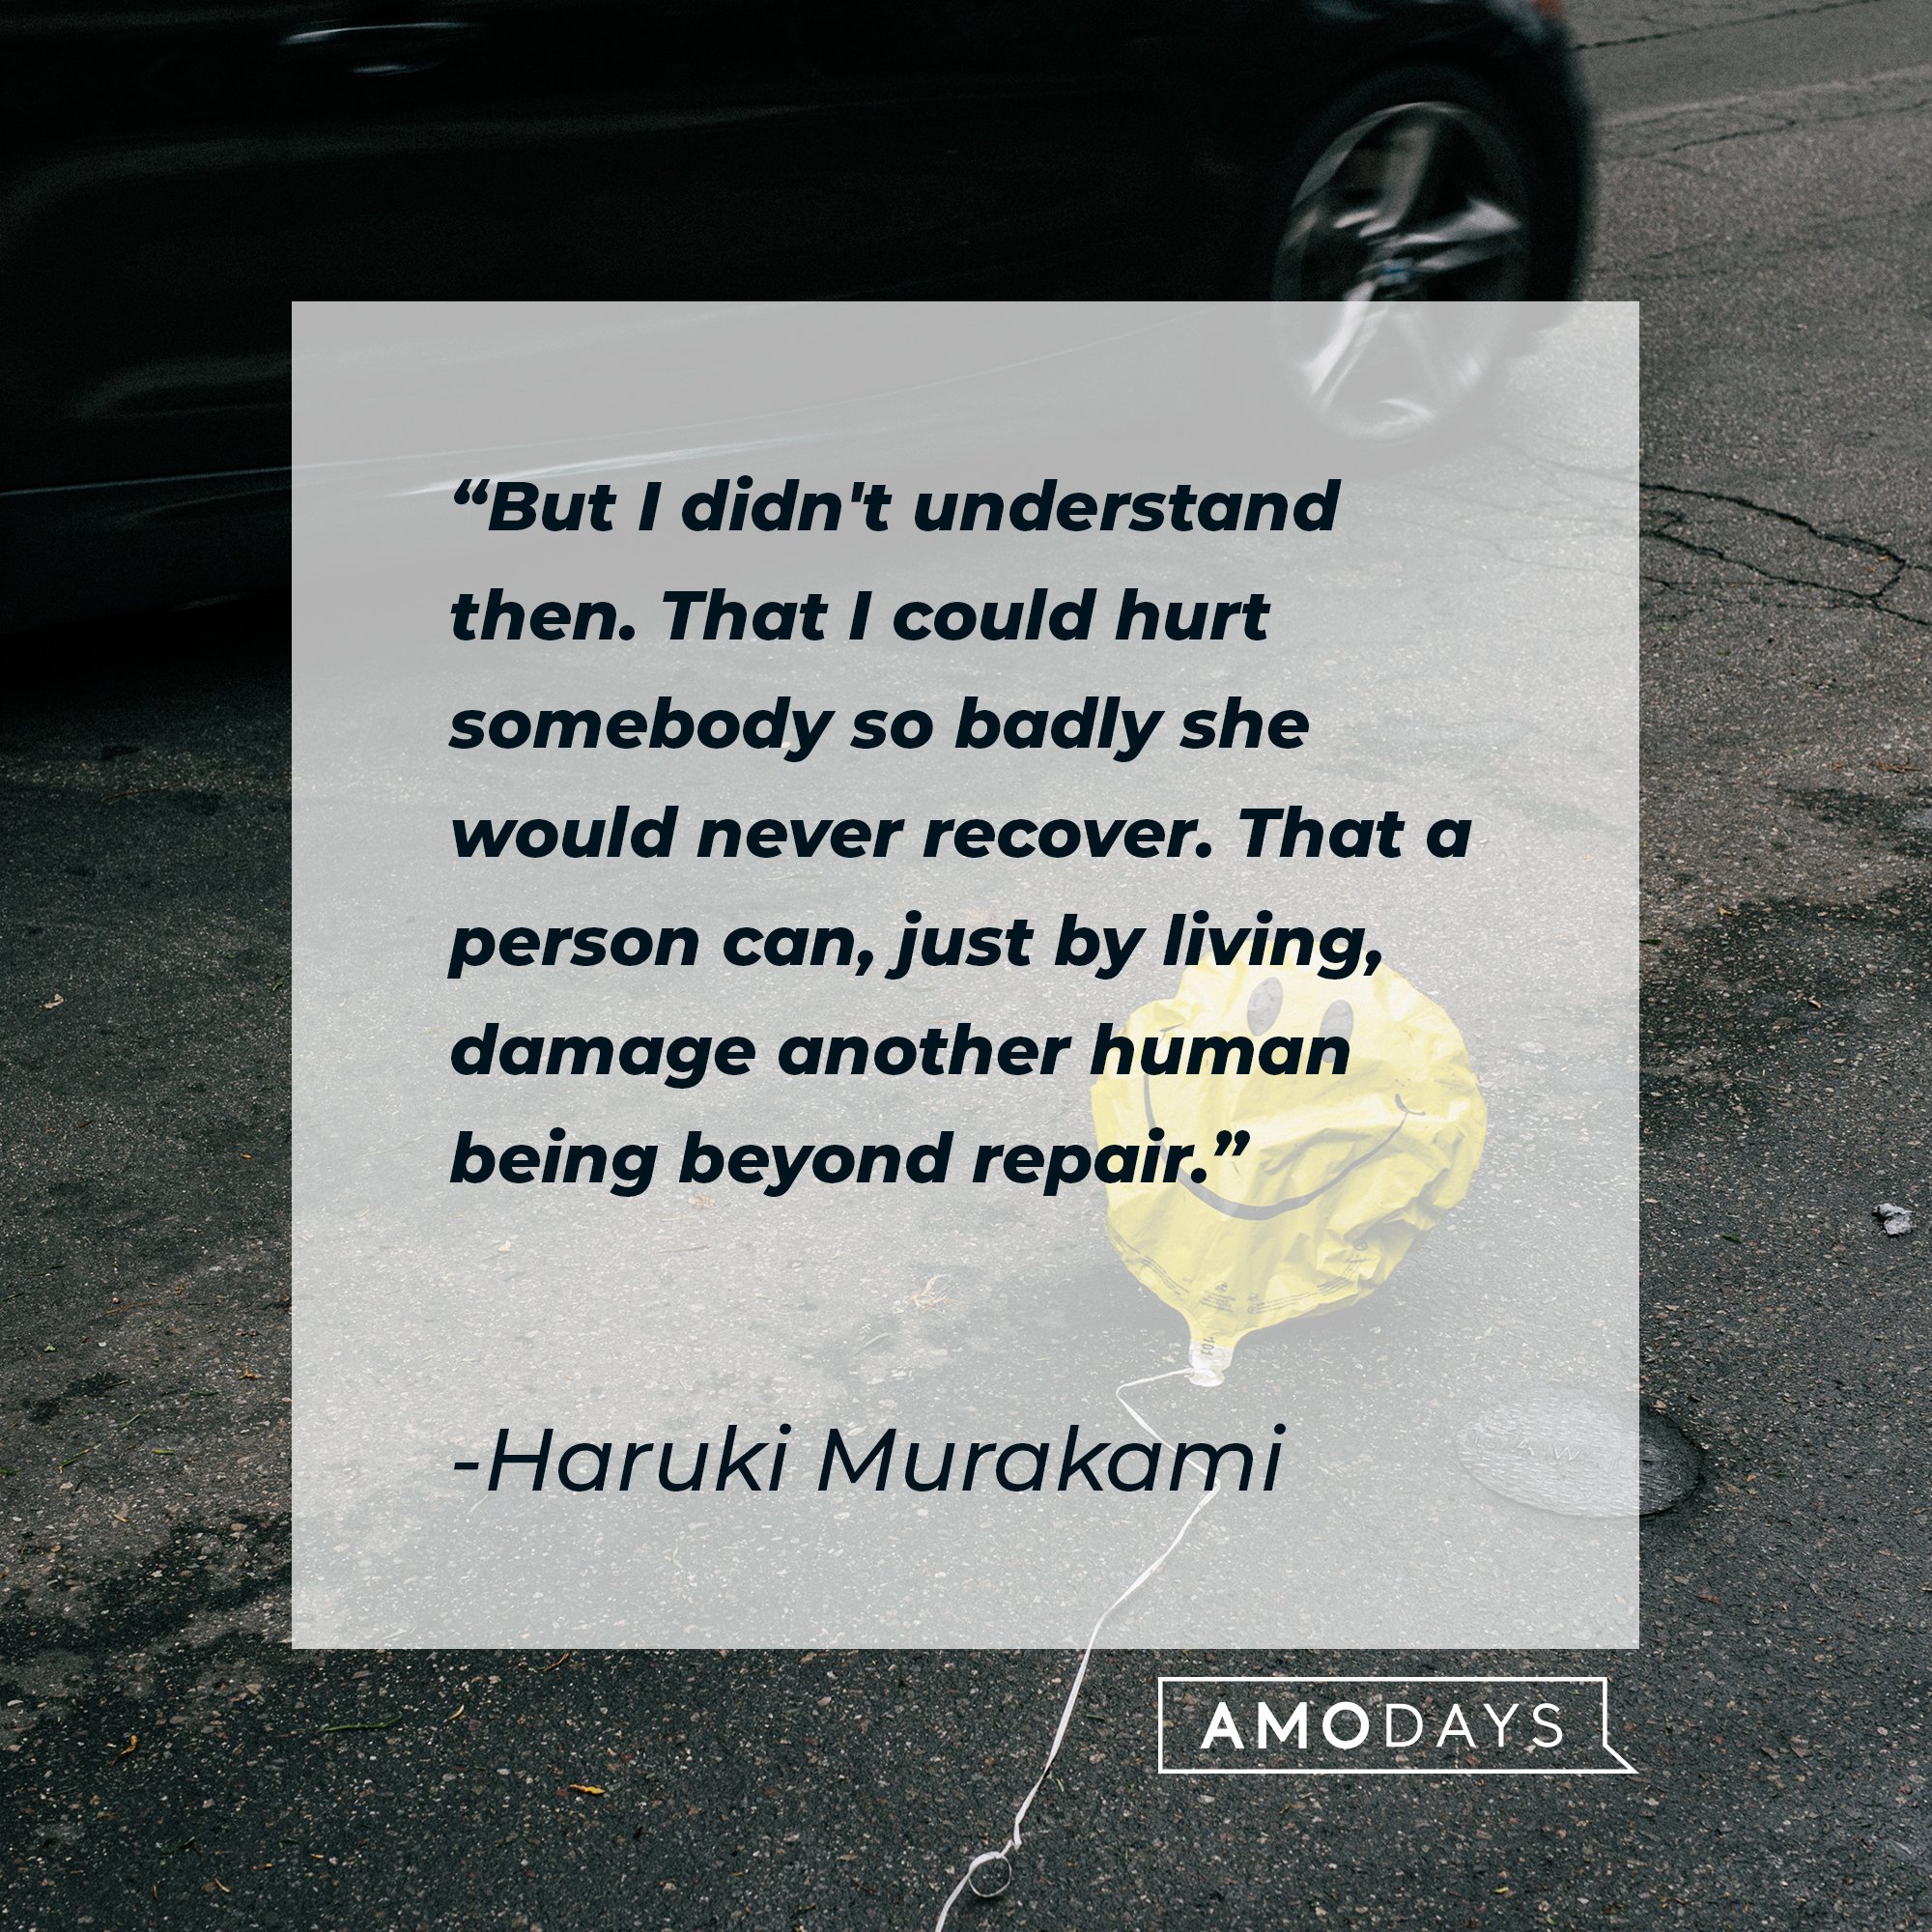 Haruki Murakami's quote: "But I didn't understand then. That I could hurt somebody so badly she would never recover. That a person can, just by living, damage another human being beyond repair." | Image: AmoDays